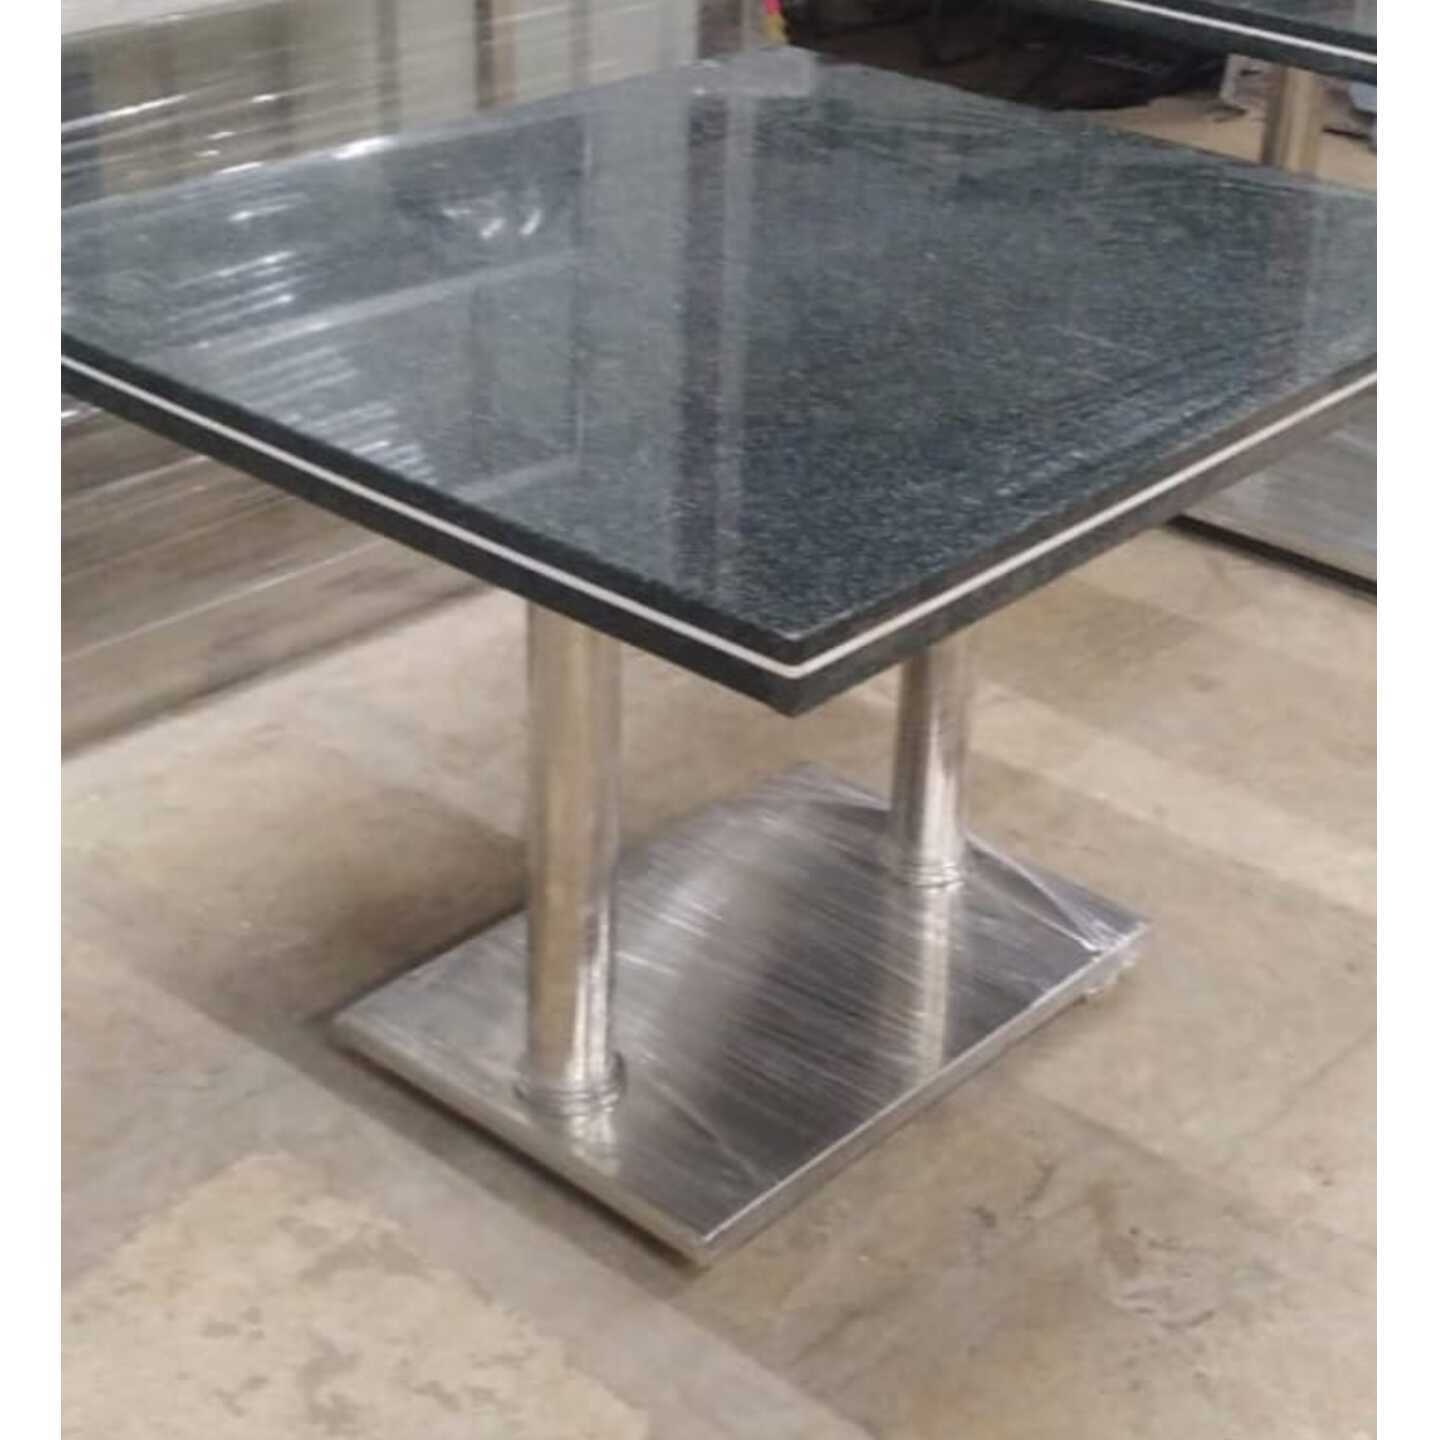 SS Table Frame With Granite Top 